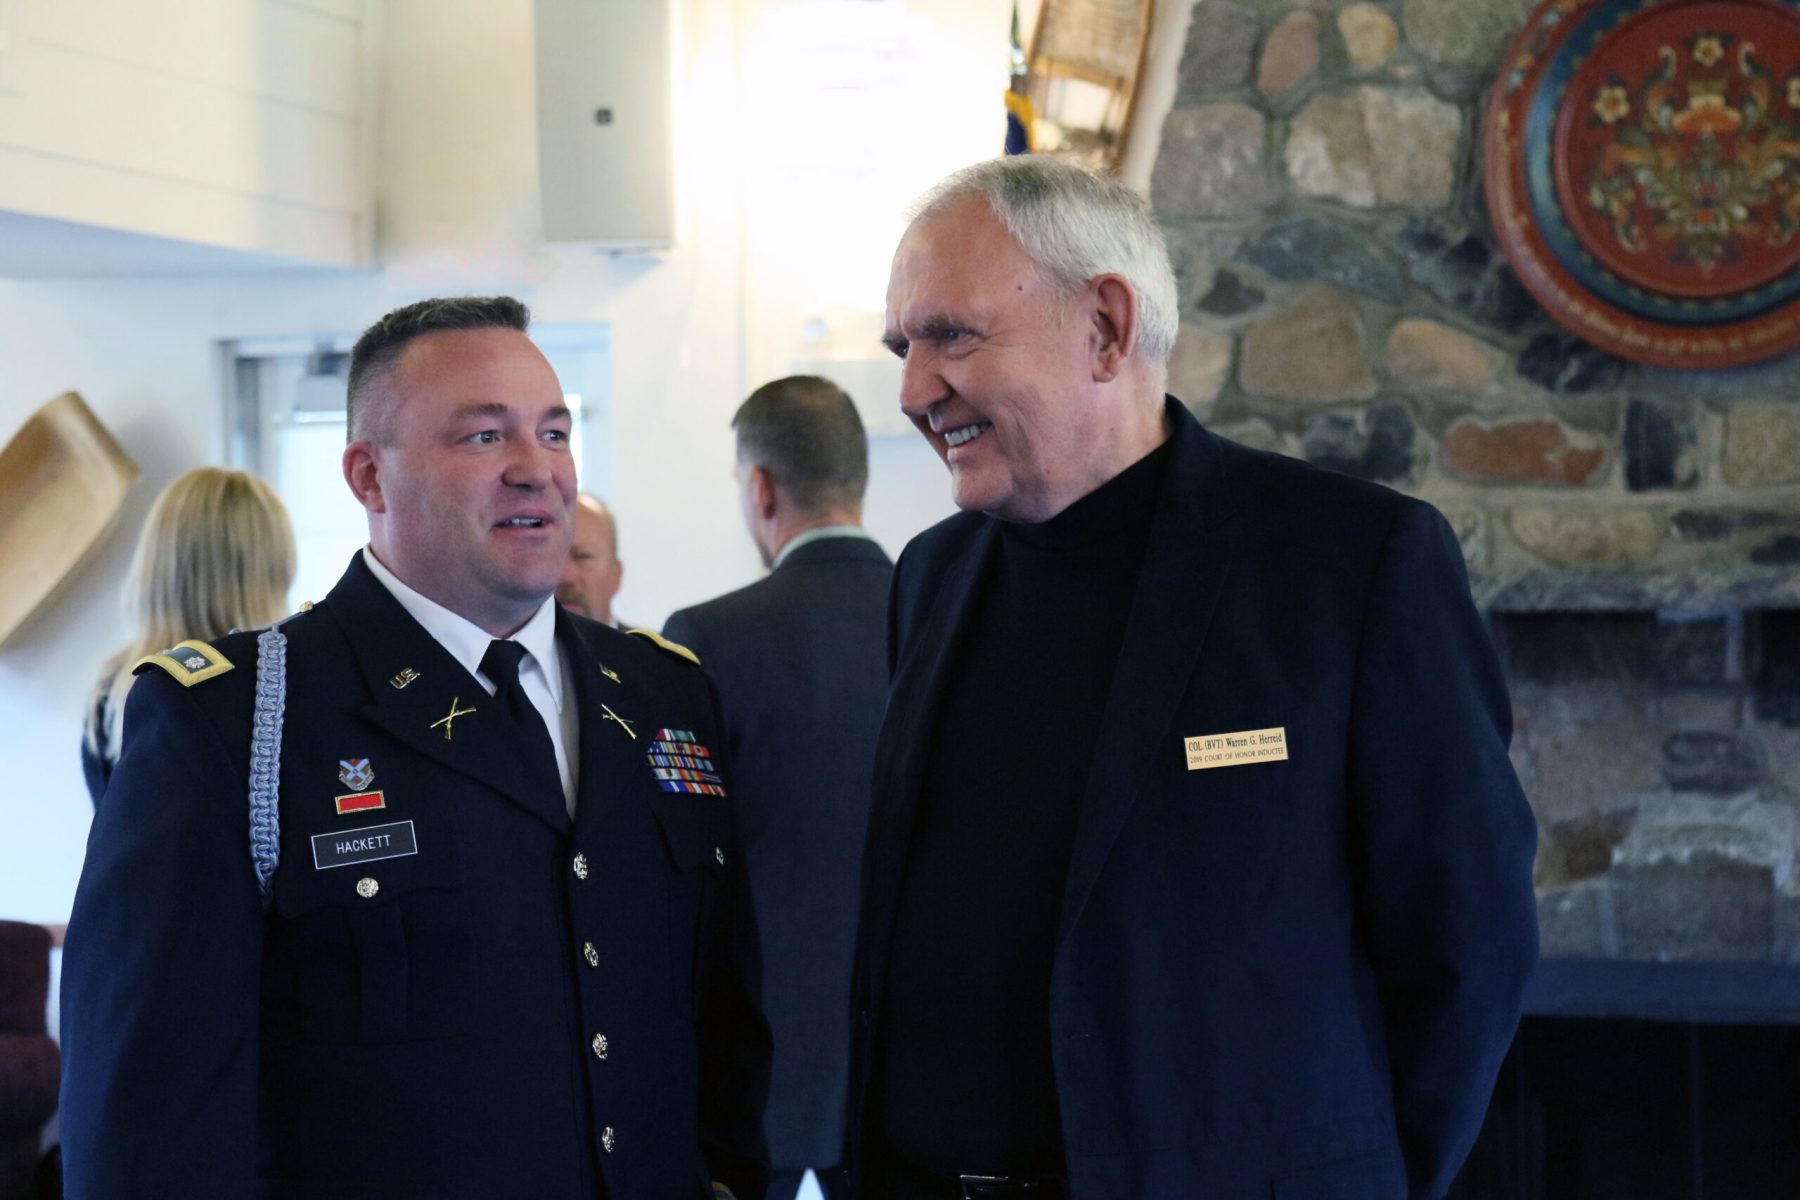 Lt. Col. Hackett and Colonel (Brevet) (Ret.) Warren G. Herreid talk prior to the Court of Honor Induction Ceremony on Camp Ripley on October 6th 2019.